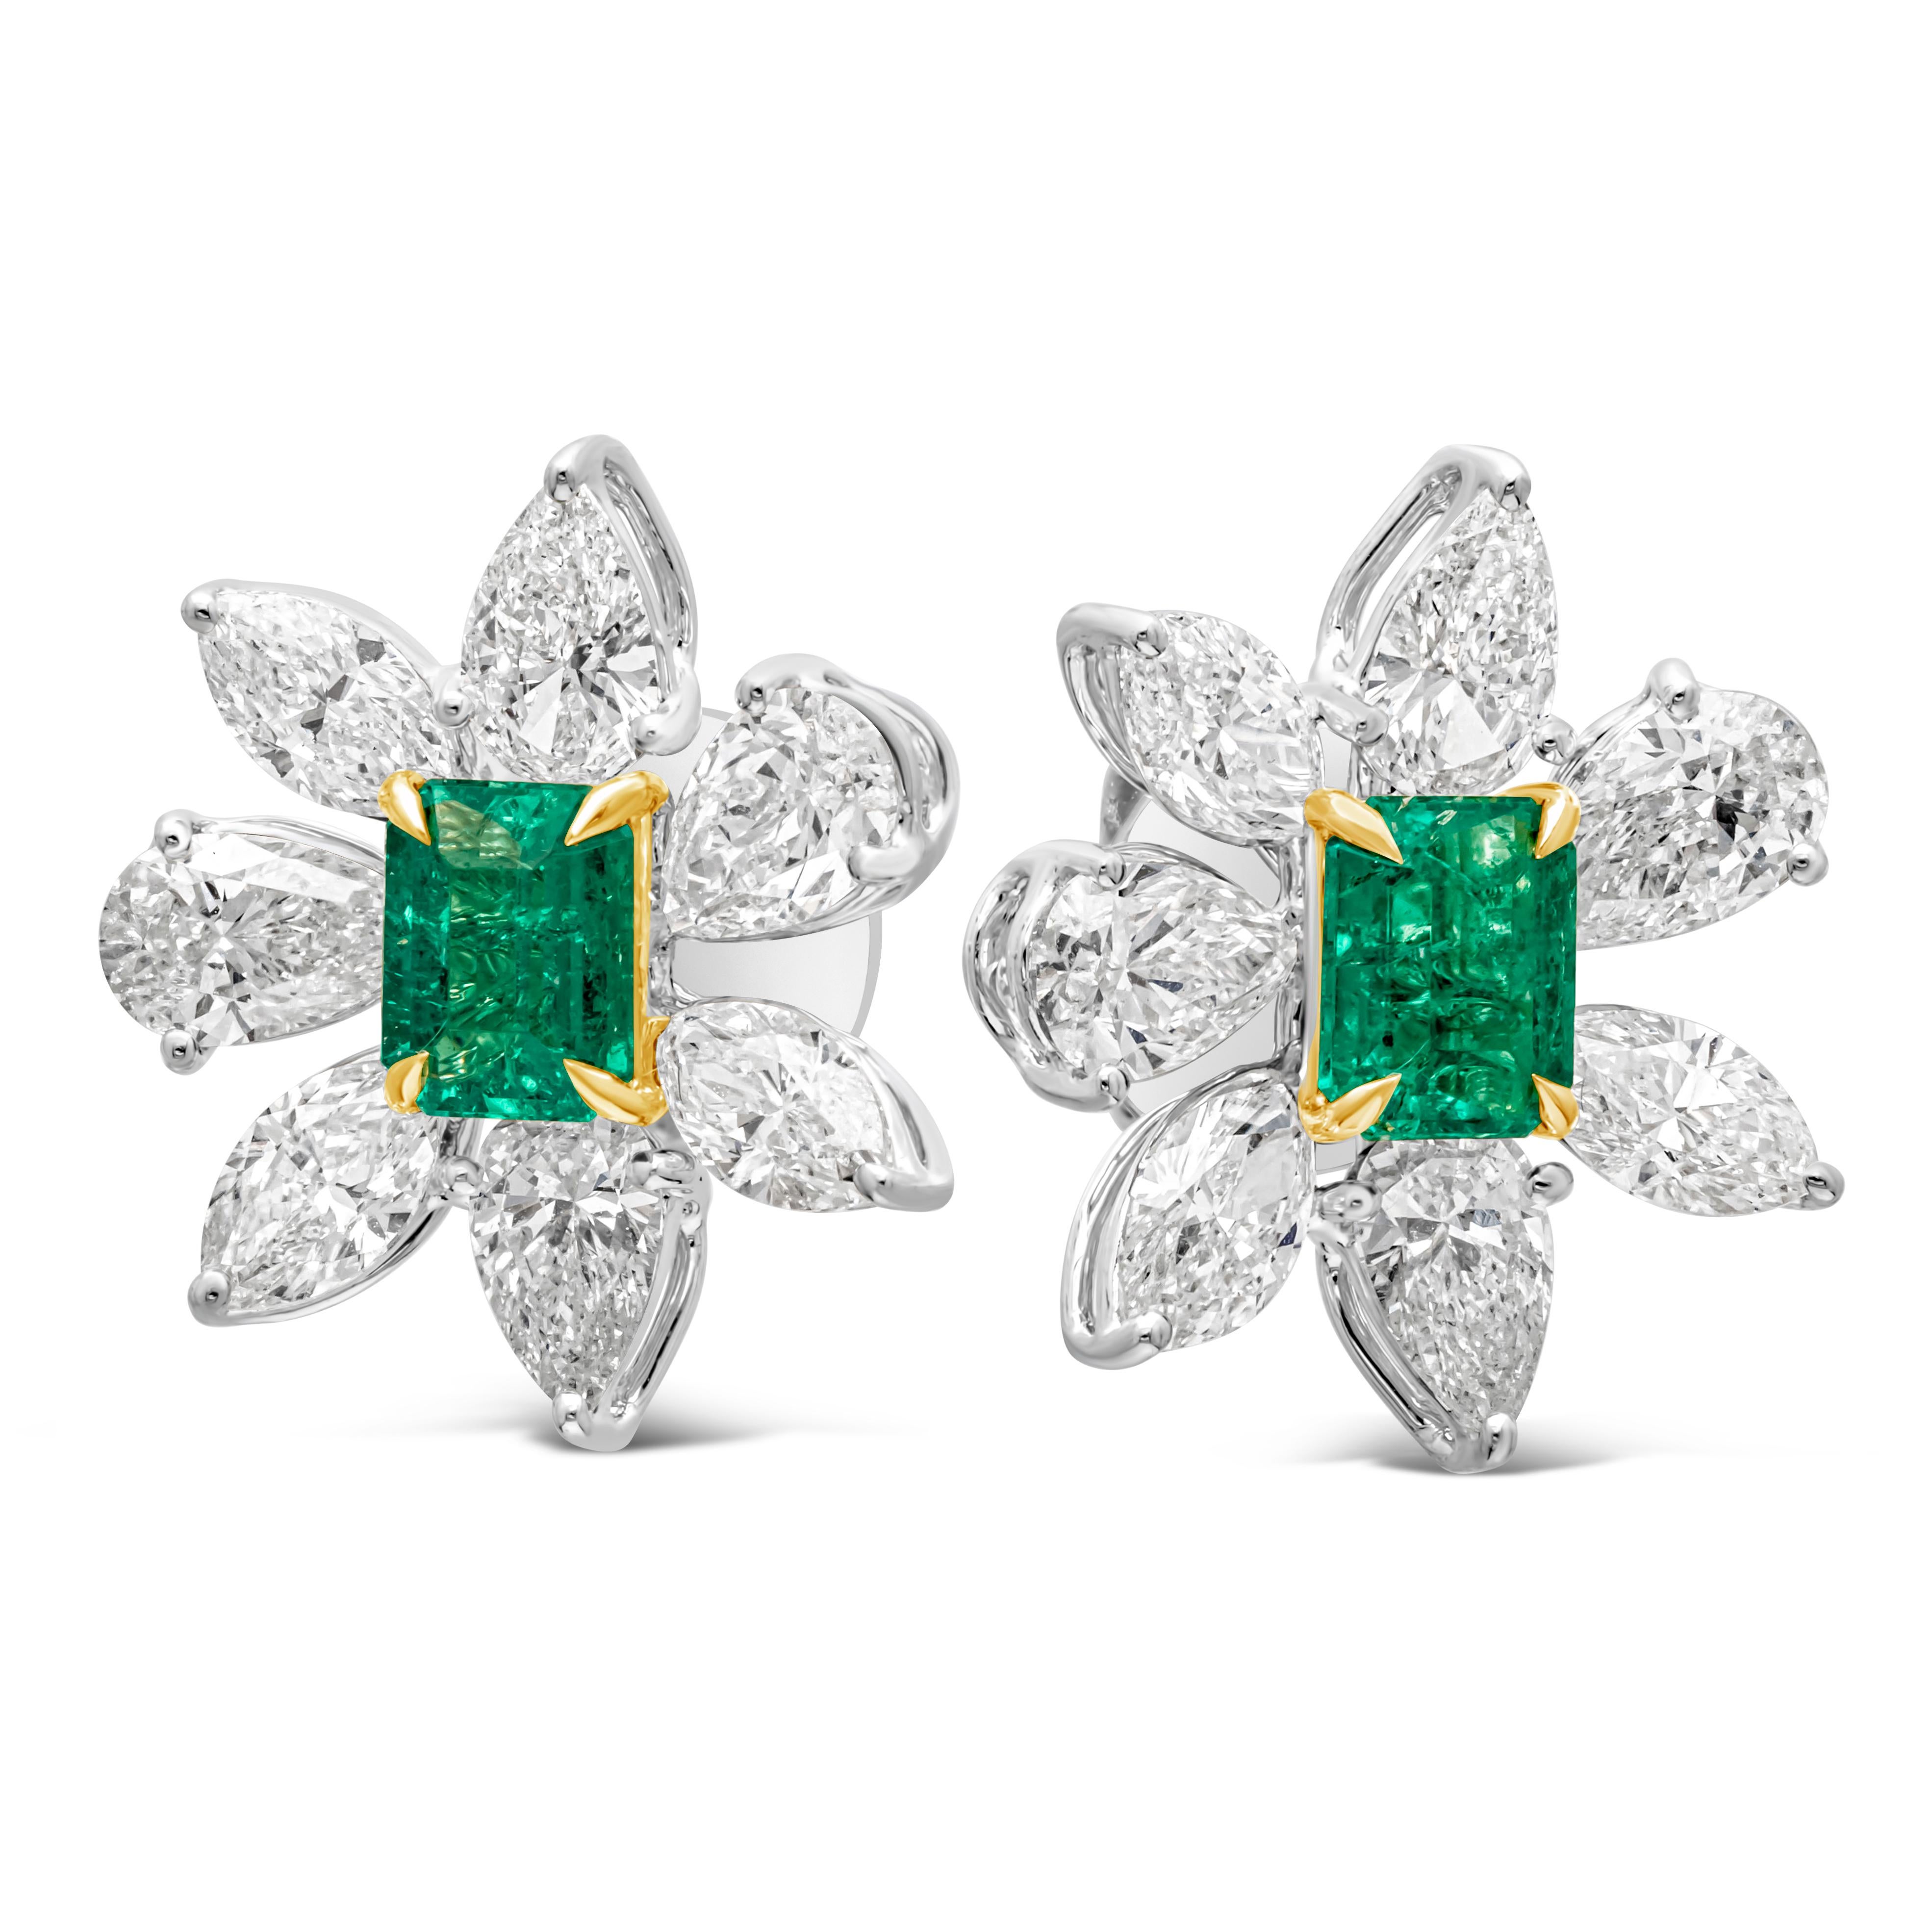 Contemporary 1.17 Carats Total Radiant Cut Green Emerald & Mixed Cut Diamond Stud Earrings For Sale